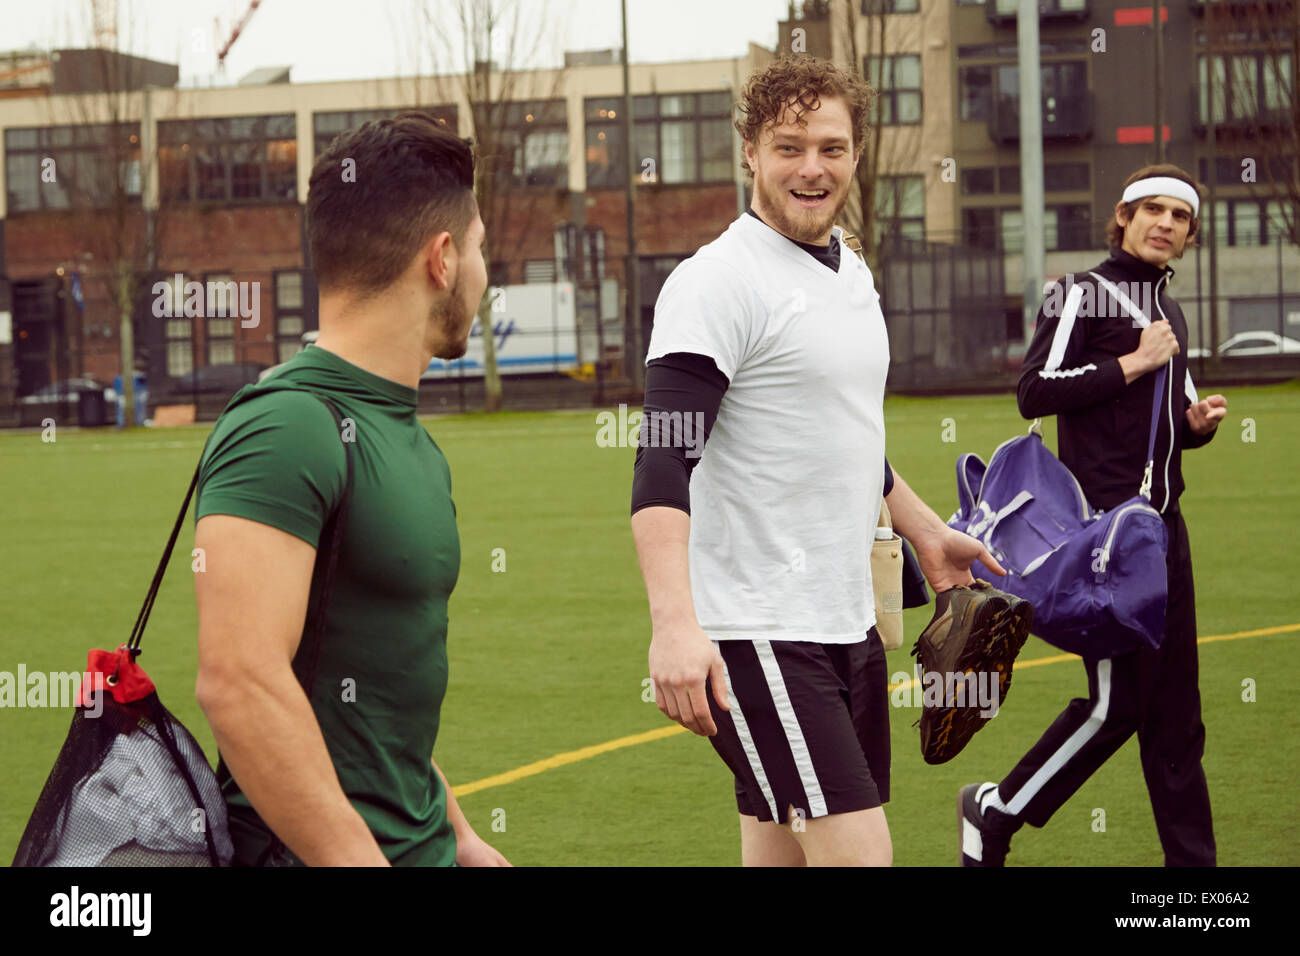 Three male soccer players carrying gym bags on soccer pitch Stock Photo